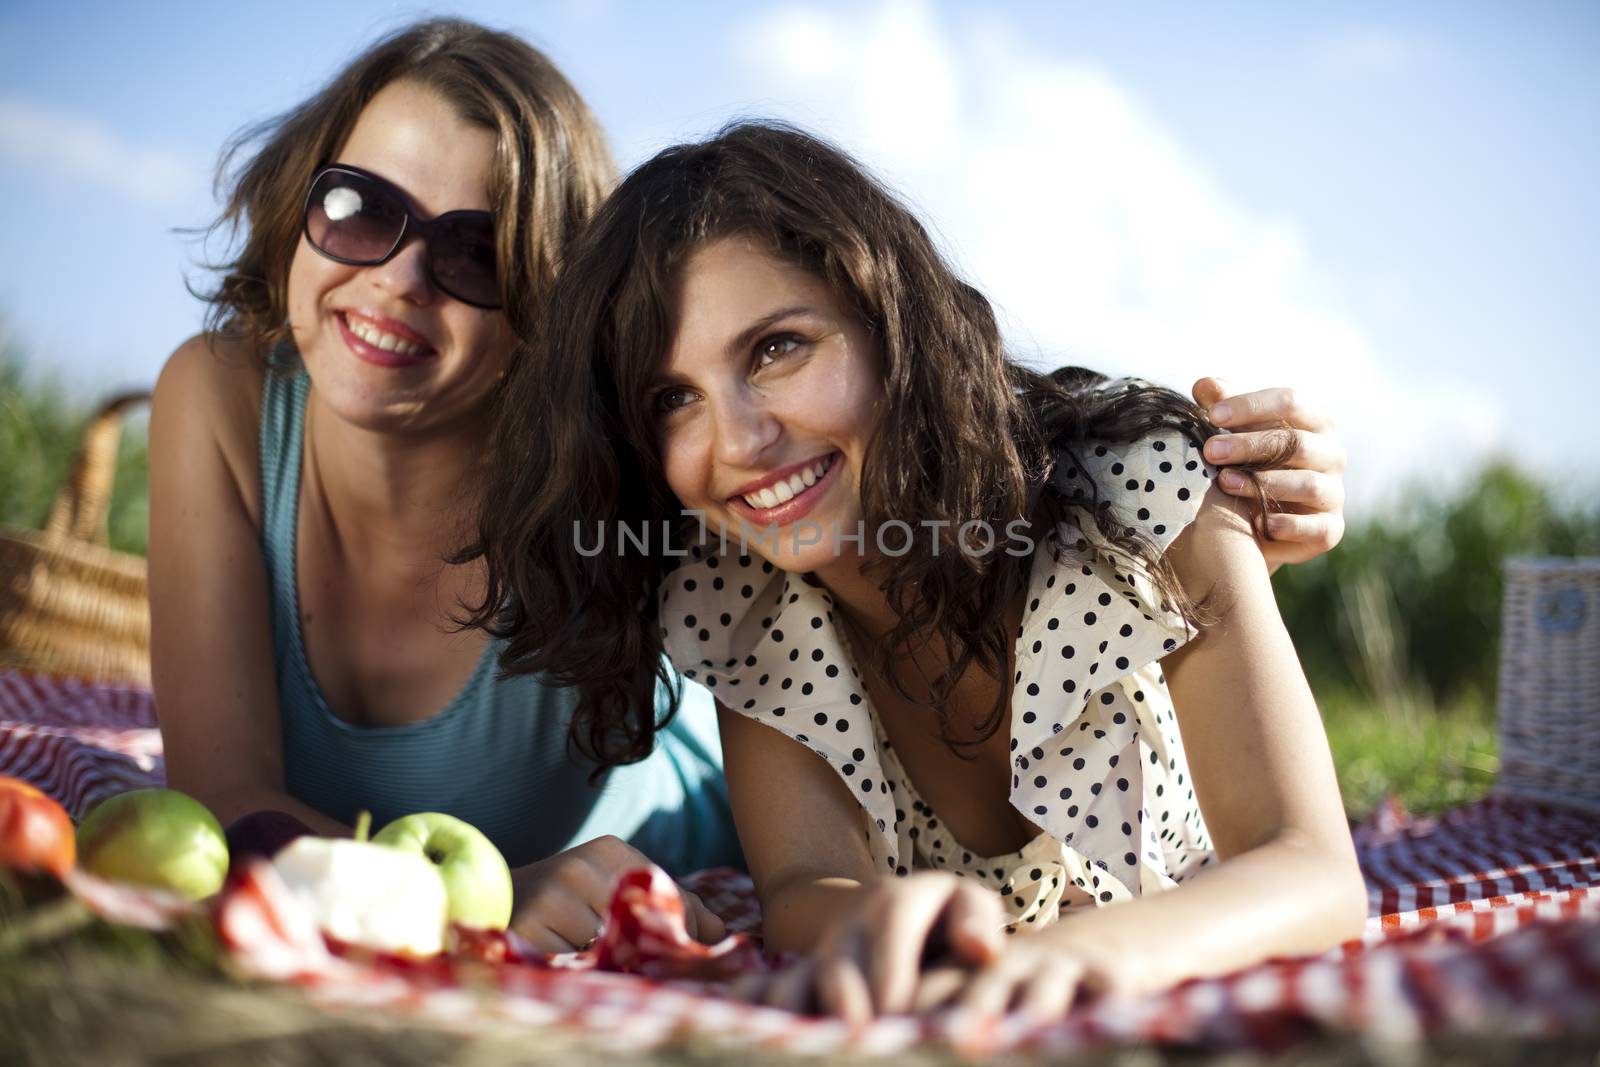 Girls on picnic, summer free time spending by JanPietruszka